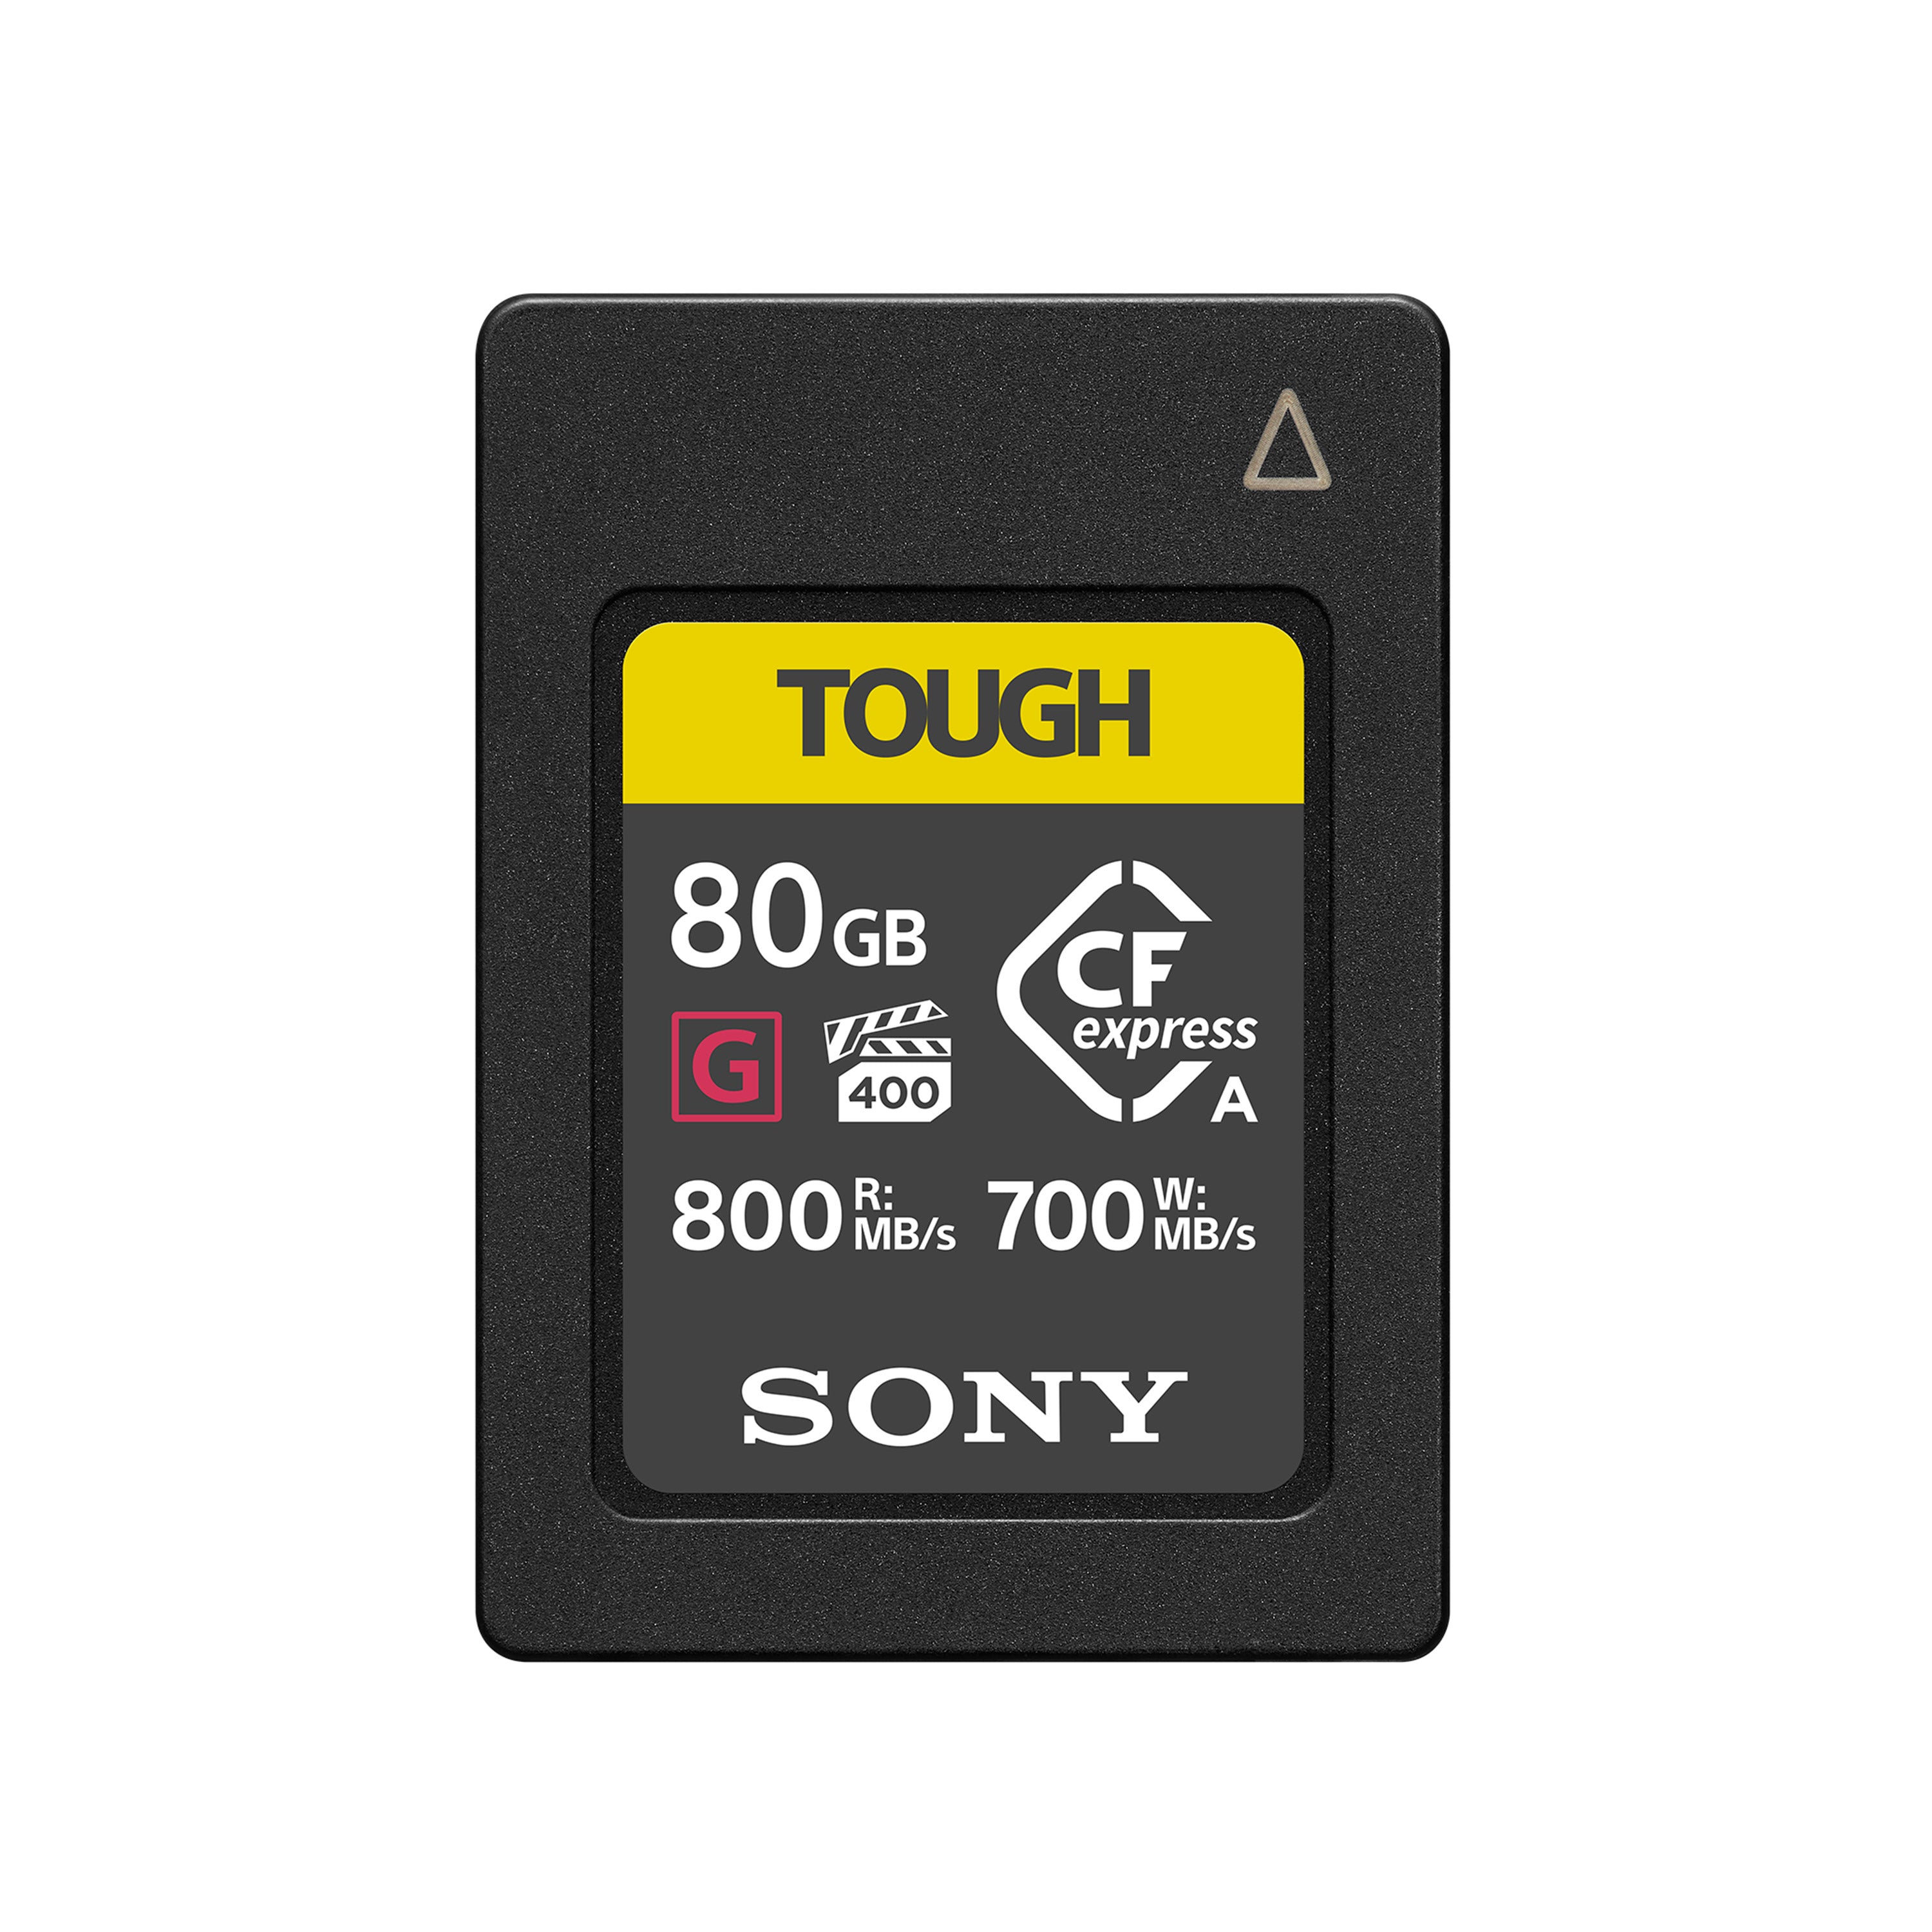 CFexpress Type A G-Series Memory Card - 80GB